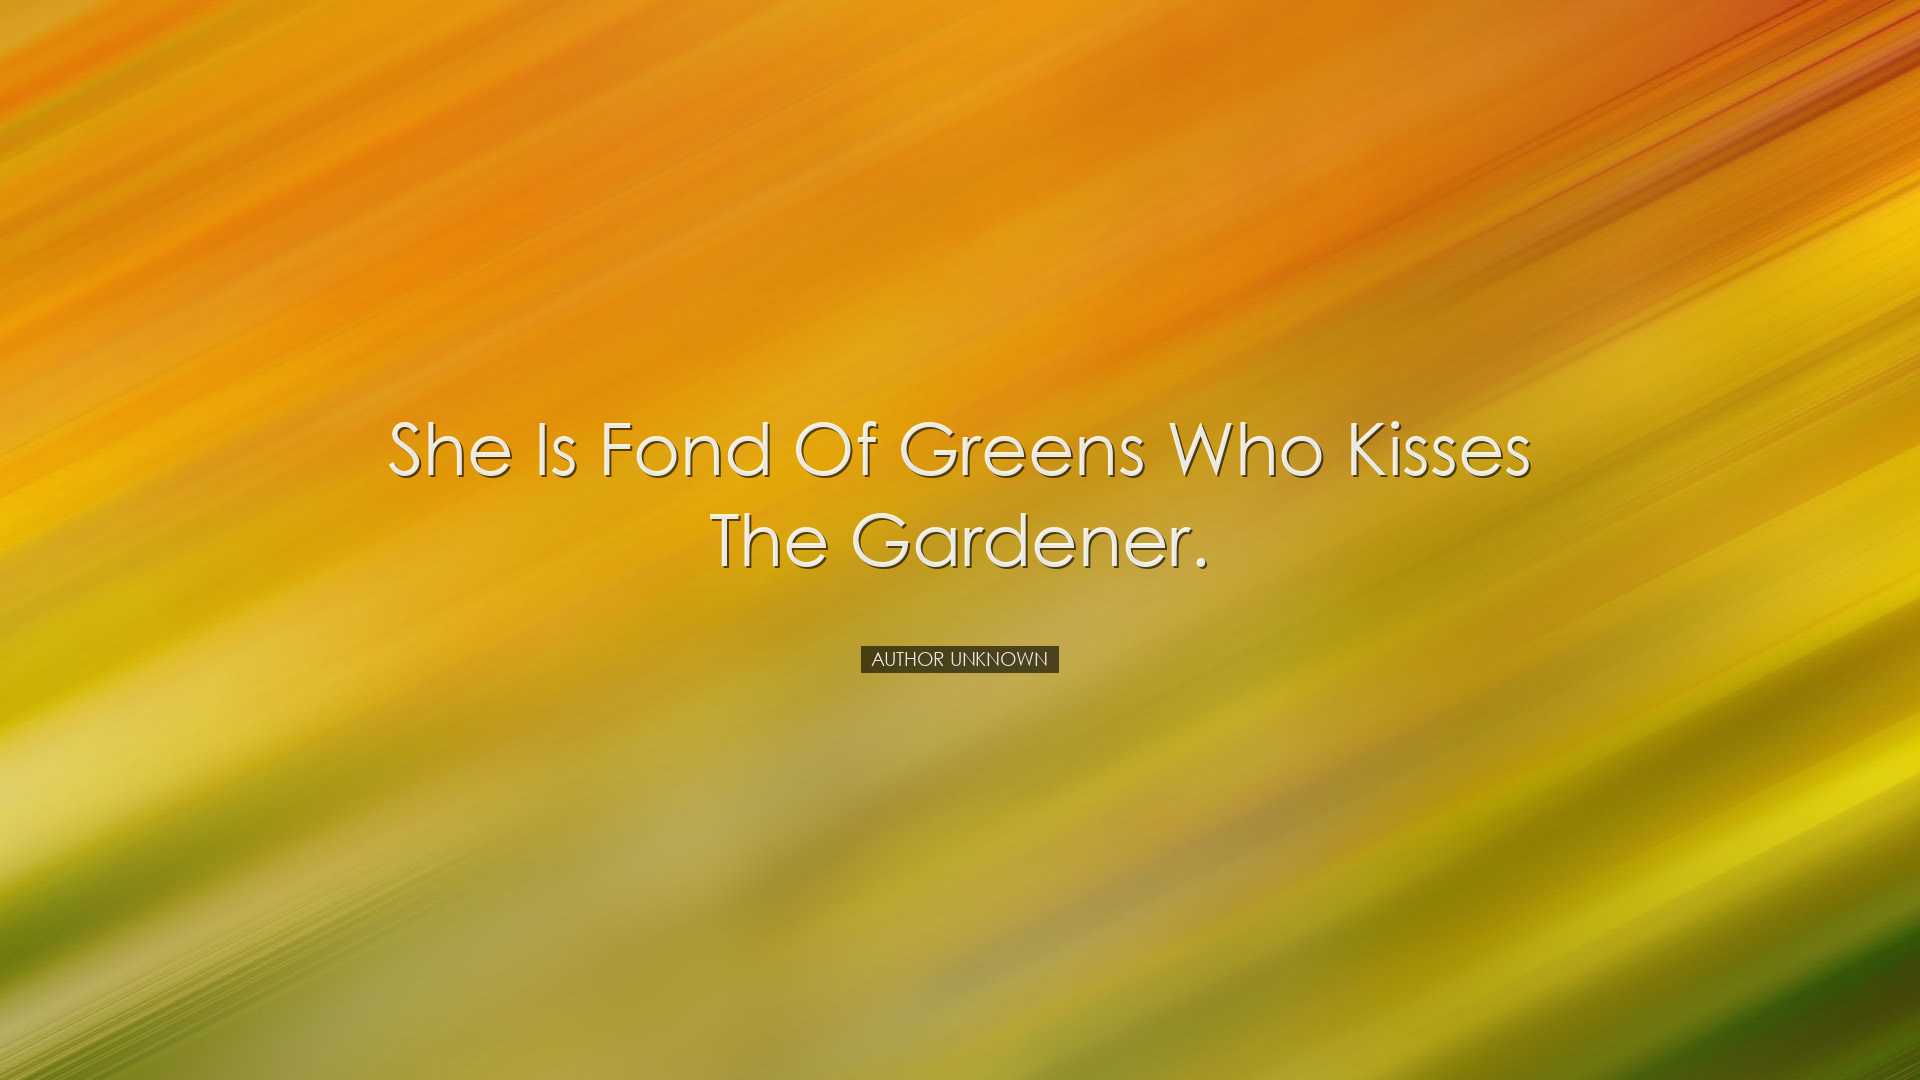 She is fond of greens who kisses the gardener. - Author Unknown